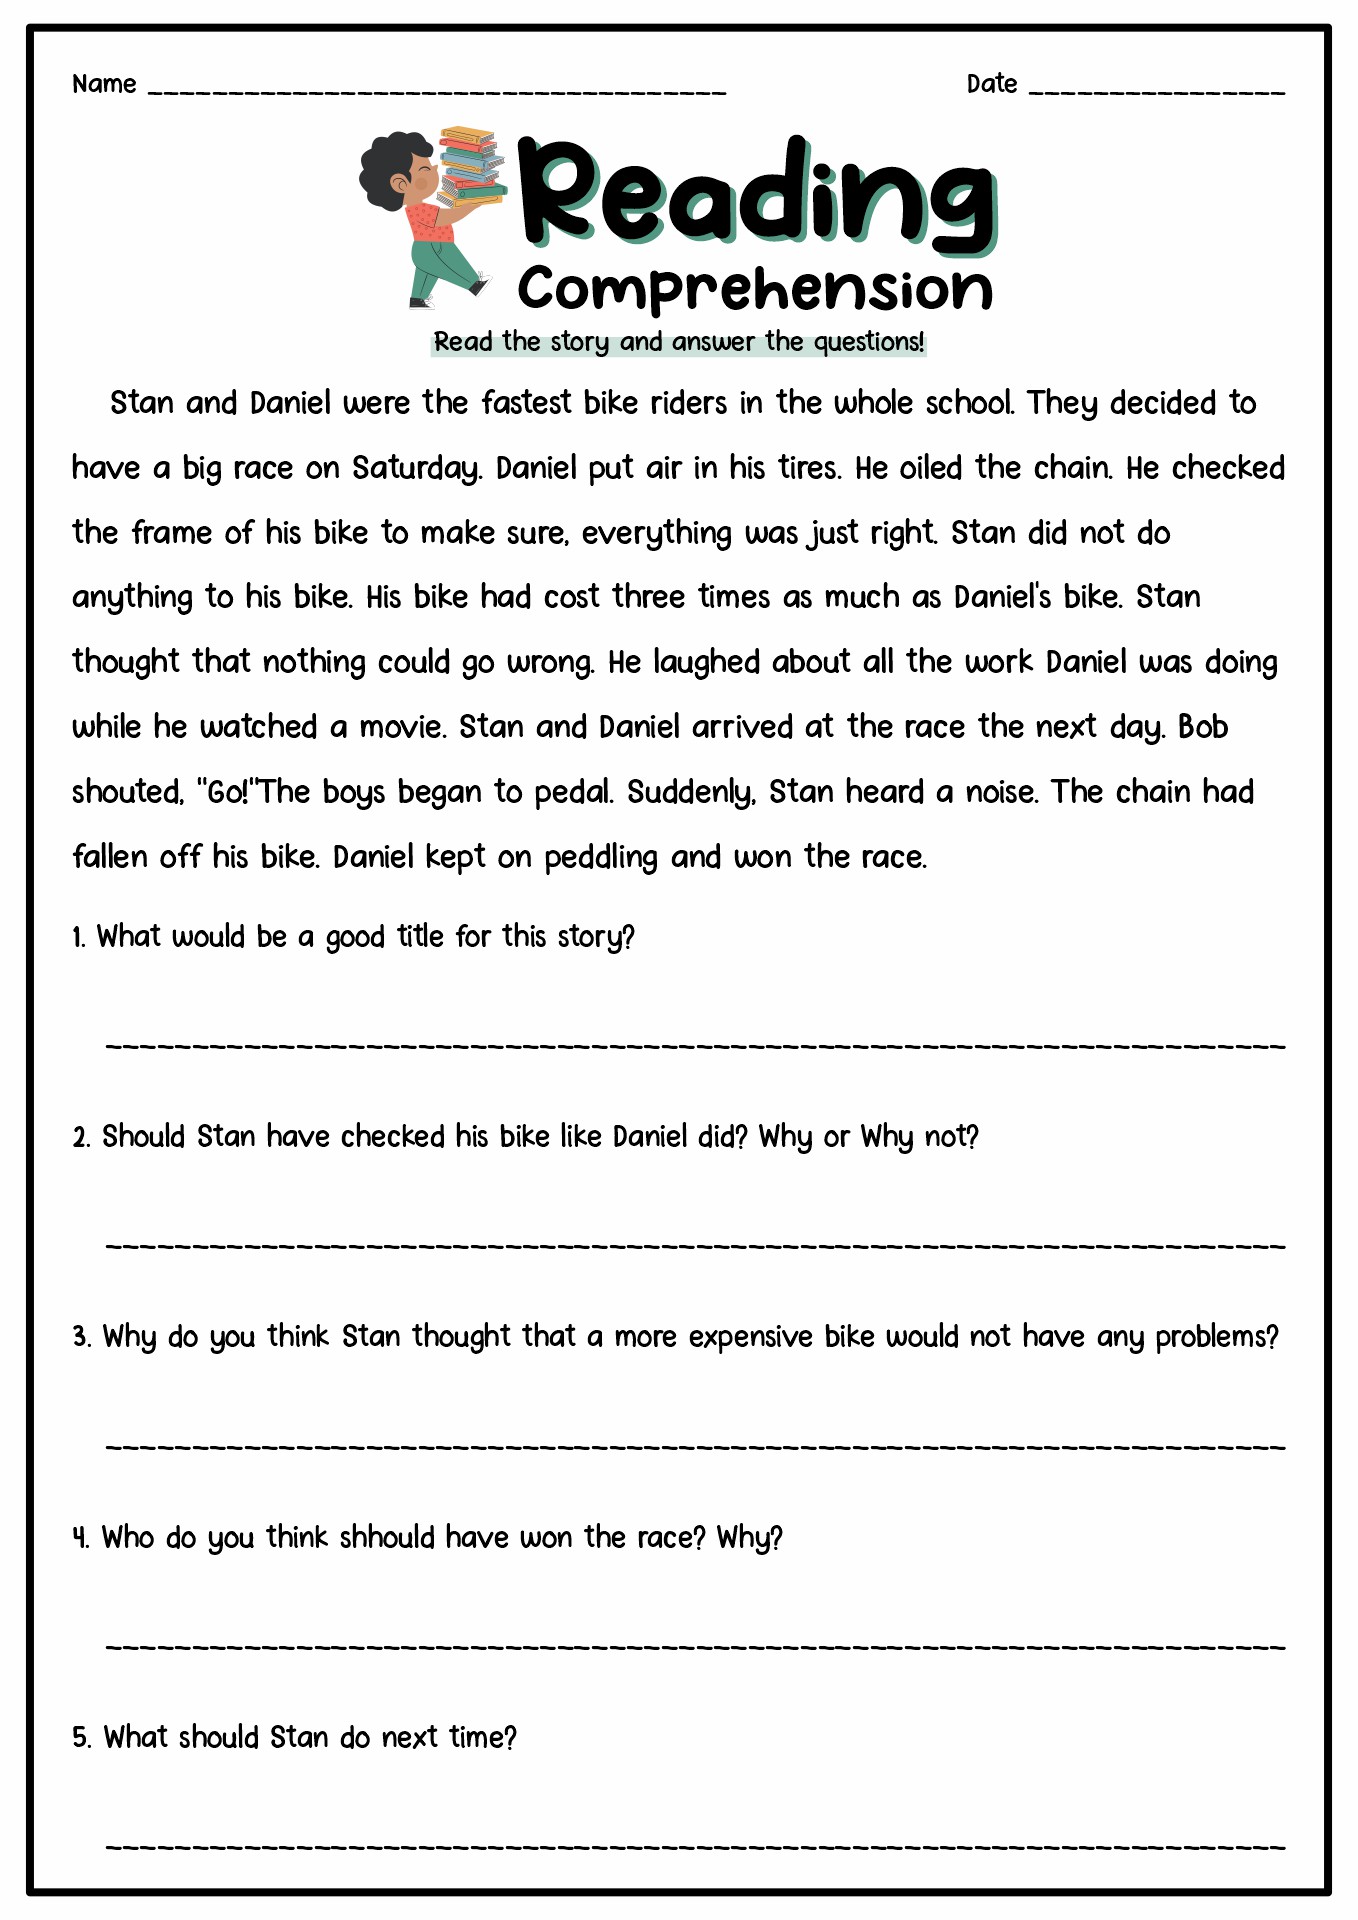 Printable 3rd Grade Short Story with Questions Image